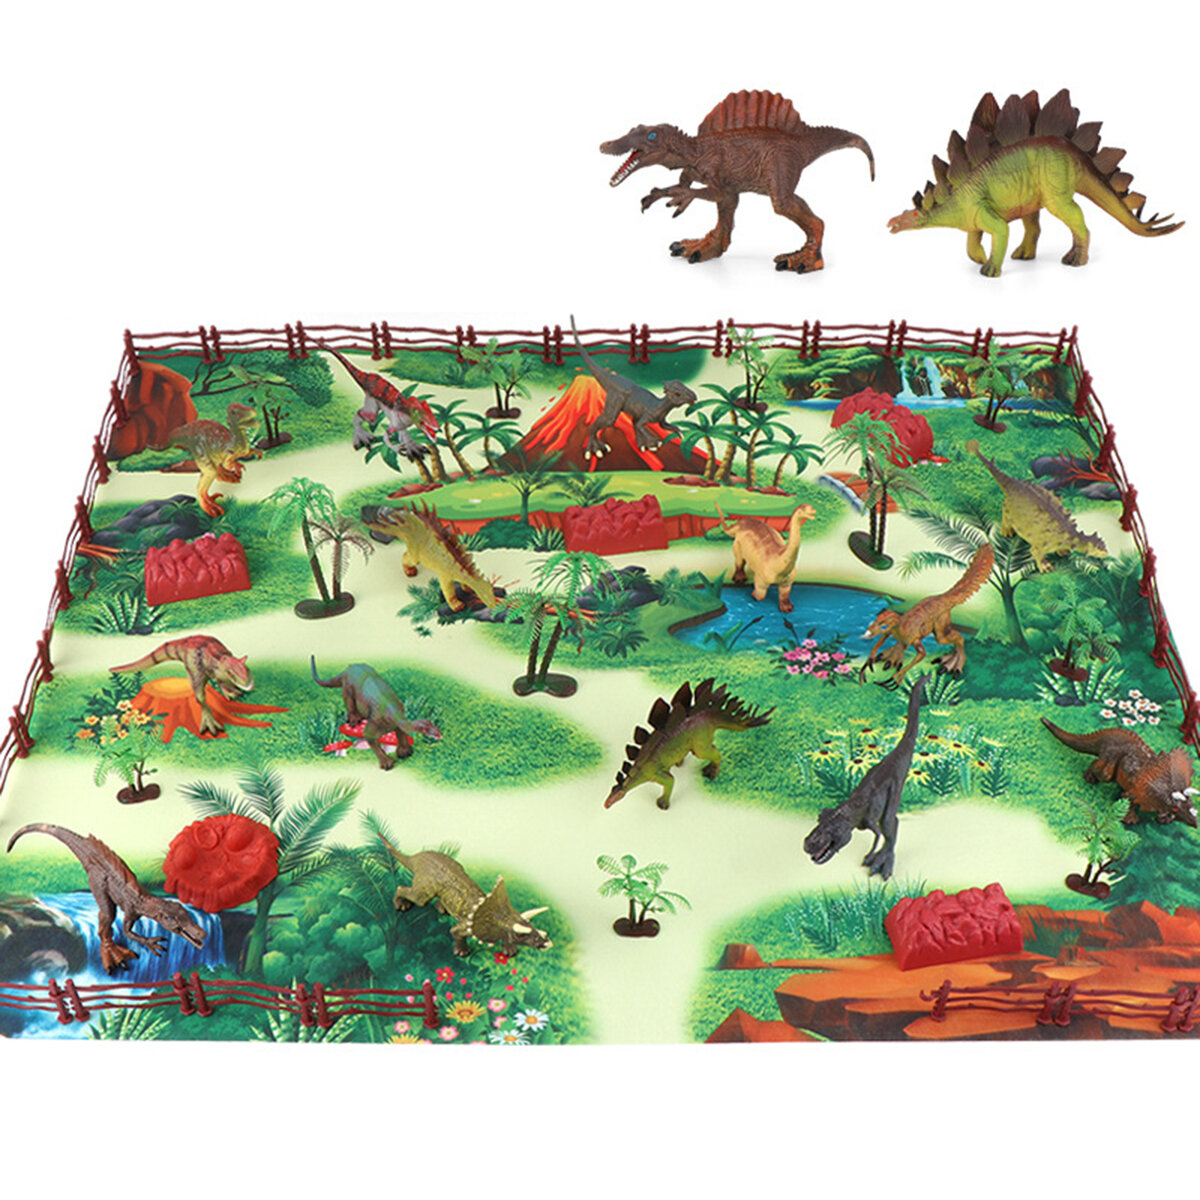 28/33/34/63/65Pcs Multi-style Diecast Dinosaurs Model Play Set Educational Toy with Play Mat for Kids Christmas Birthday